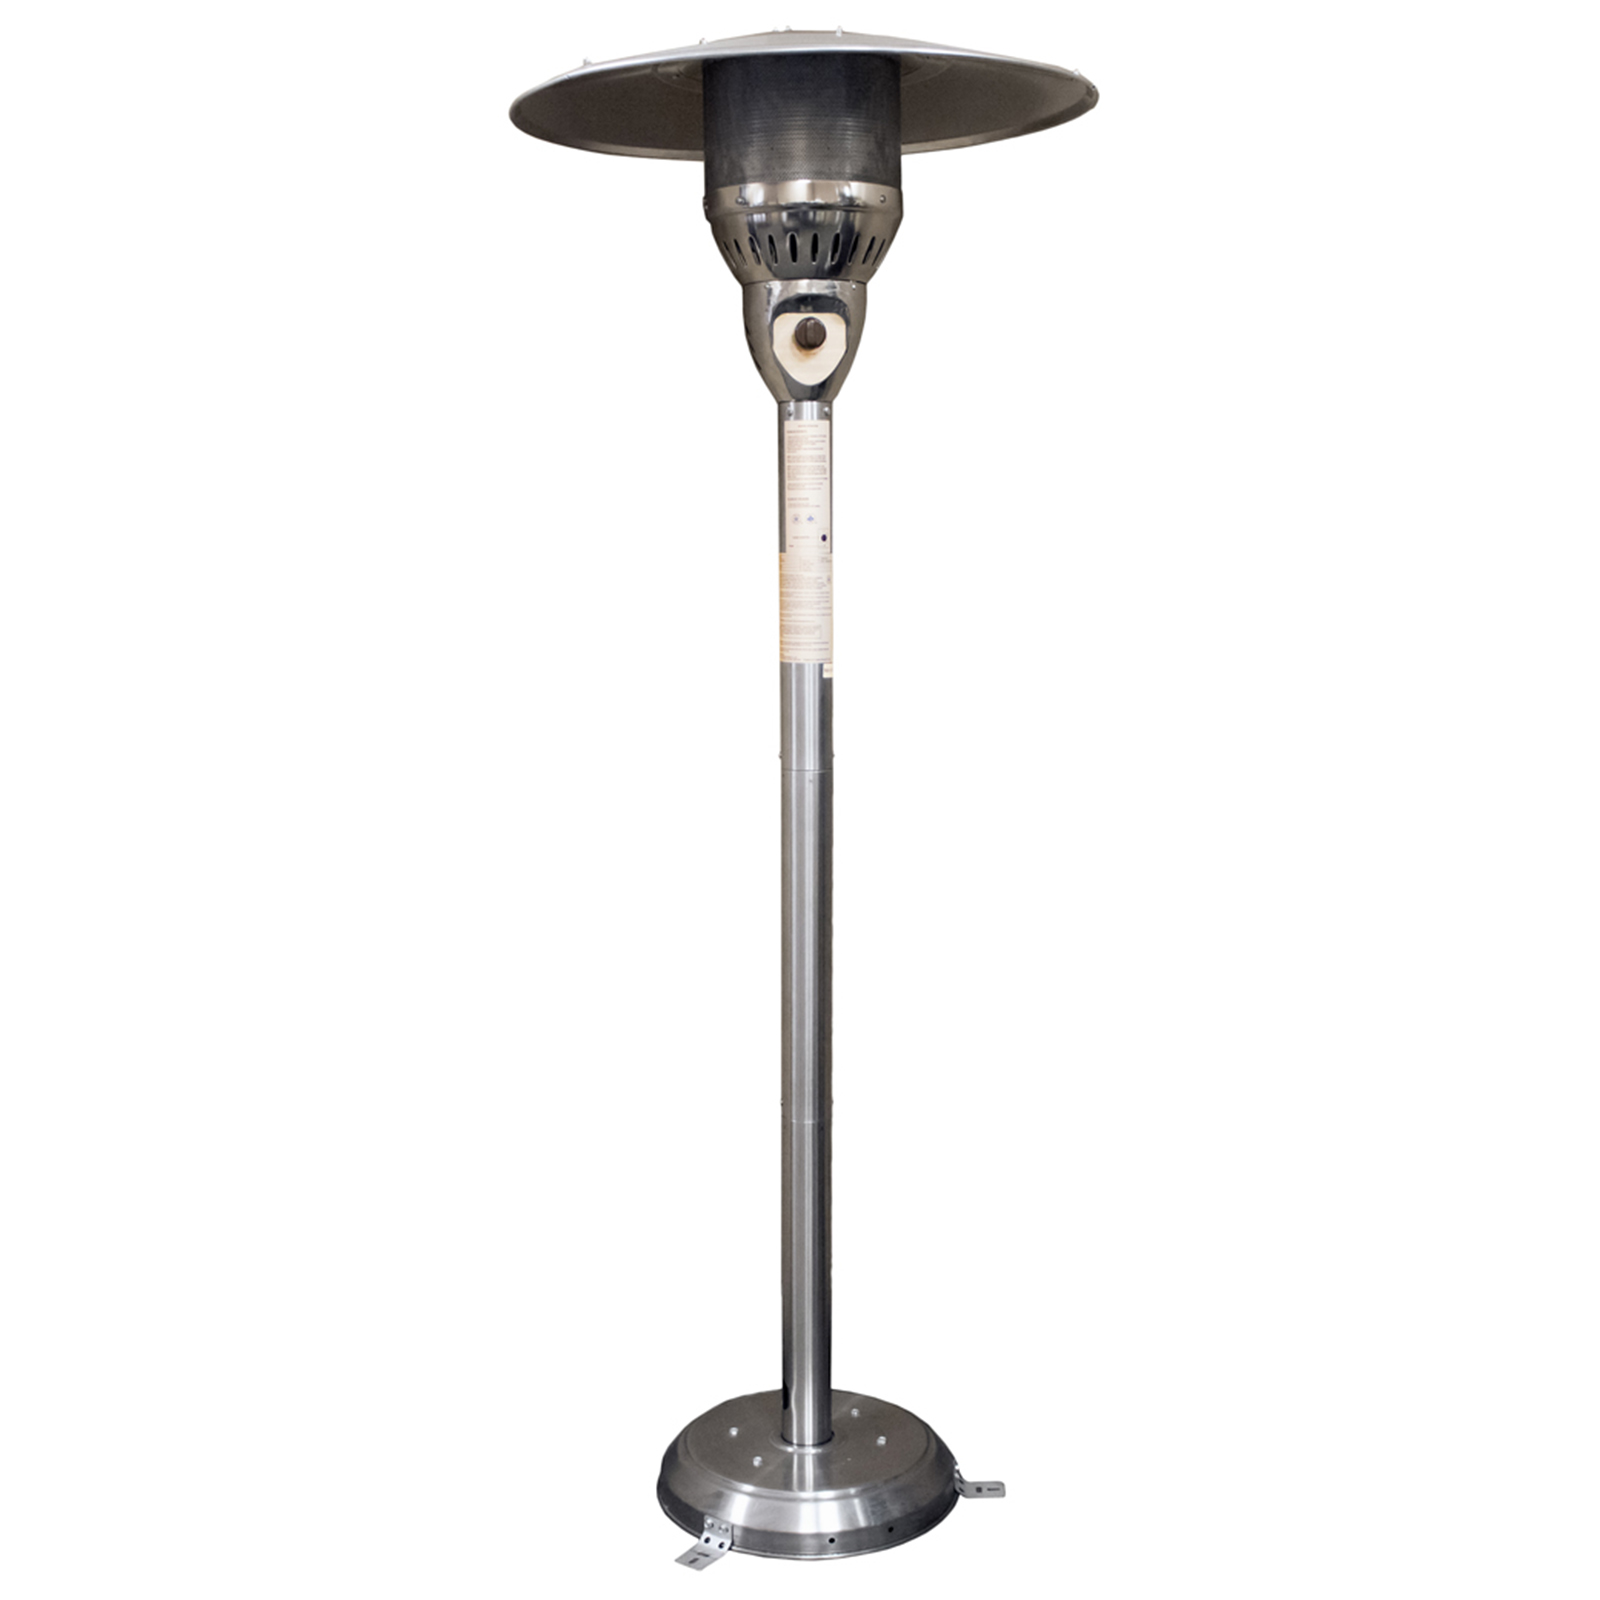 Hiland 85" Tall Stainless Steel Natural Gas Outdoor Patio Heater